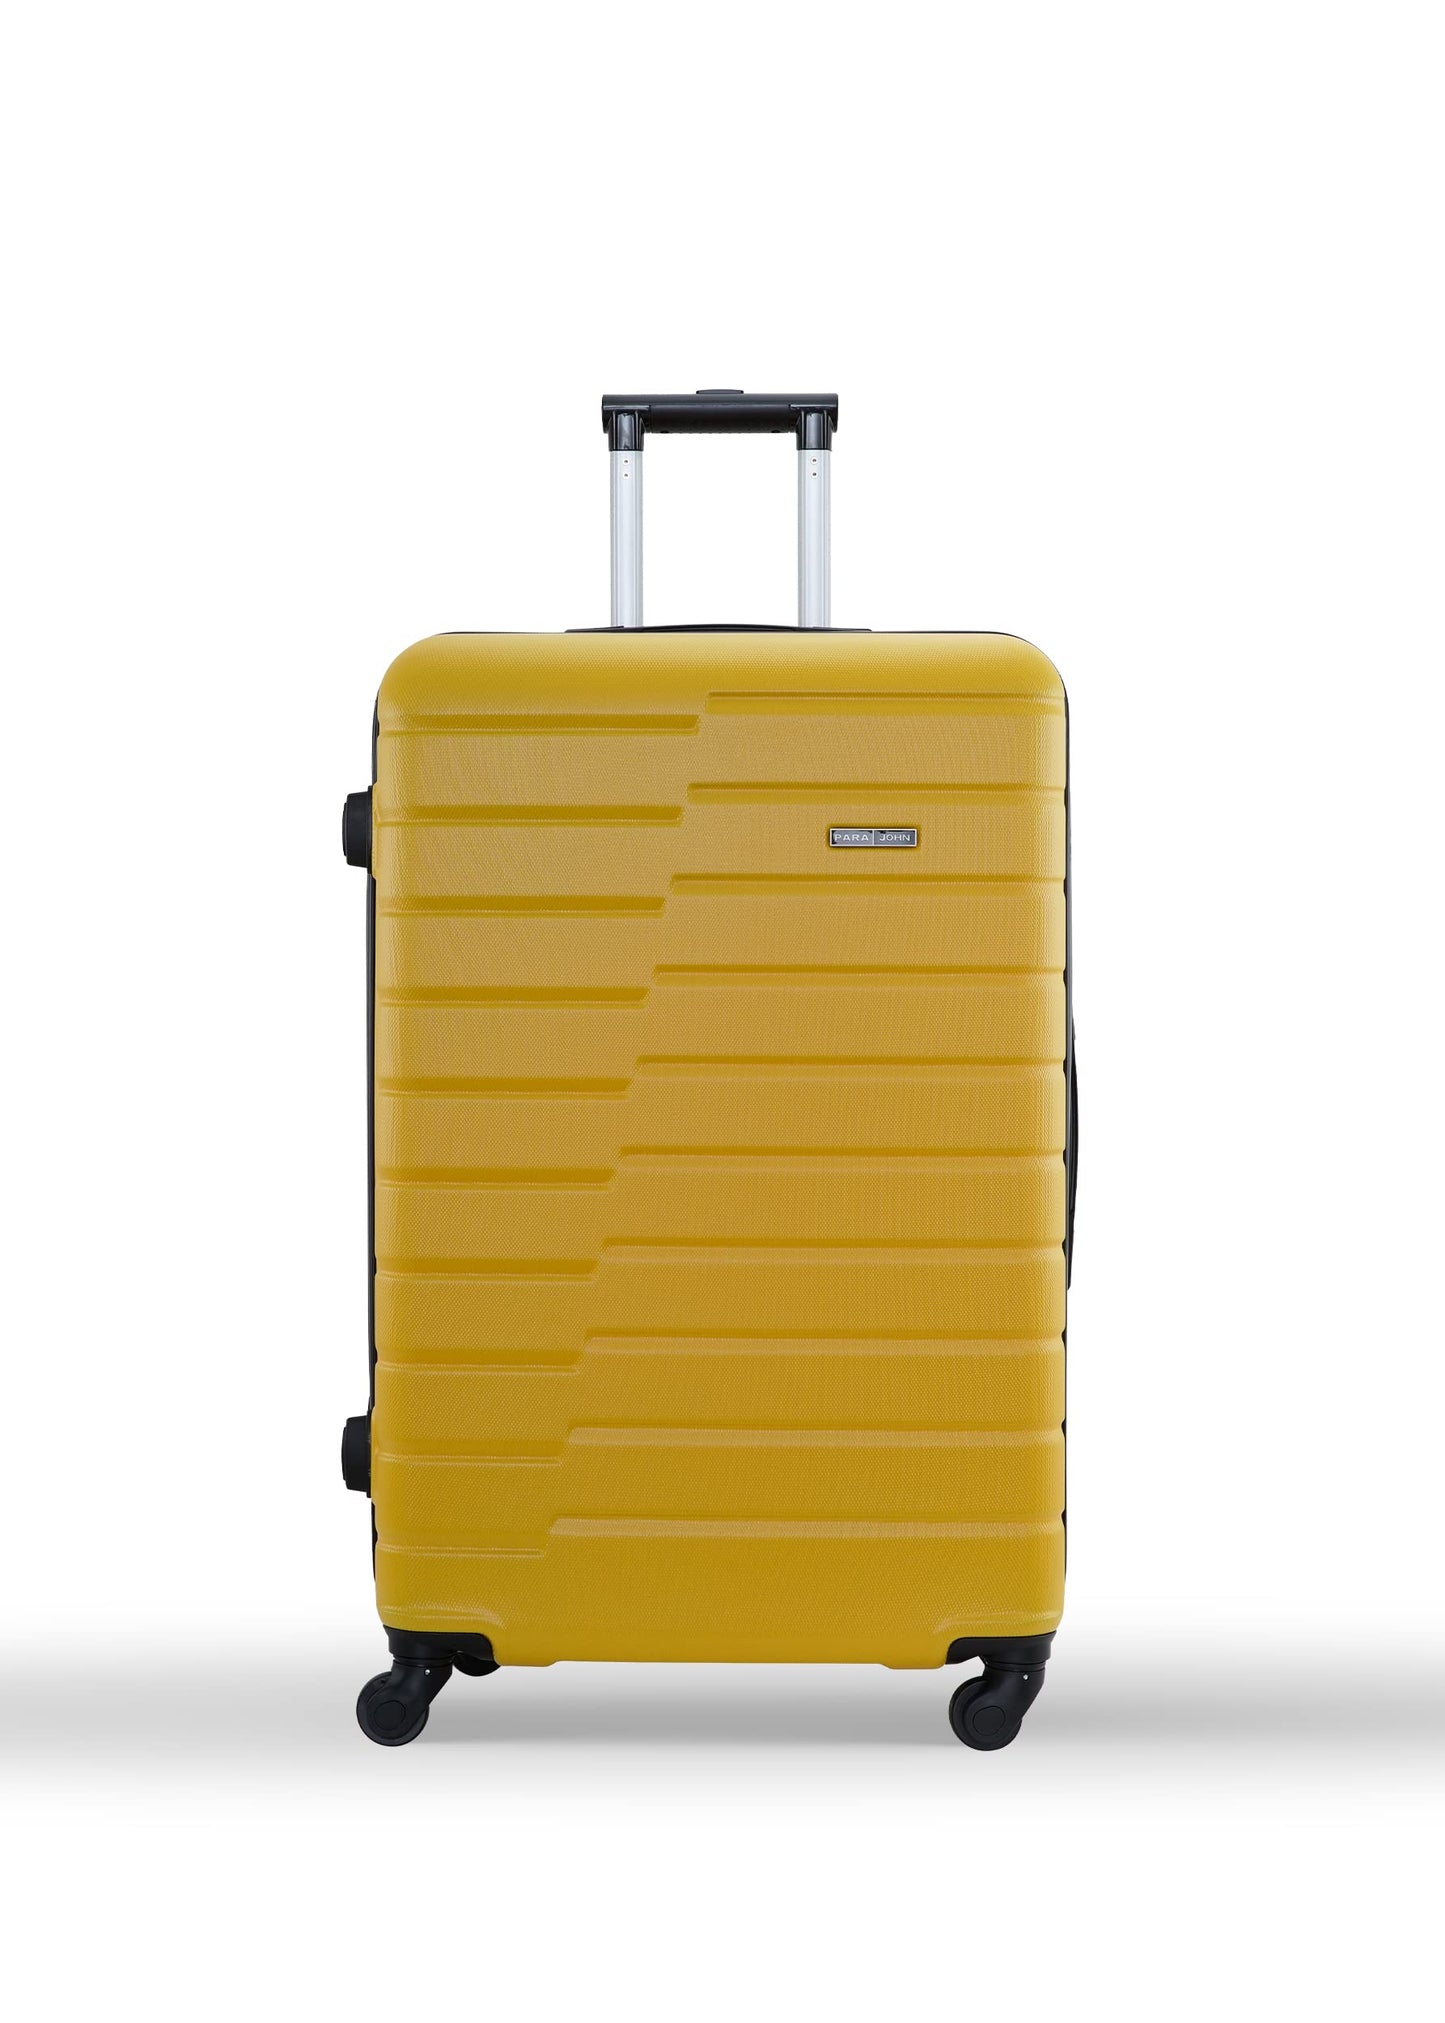 PARA JOHN Lightweight 1 Piece Single Size Abs Hard Side Large Checked Baggage Travel Luggage Trolley Bag Set With Lock For Men, Women, Unisex Hard Shell Strong Yellow